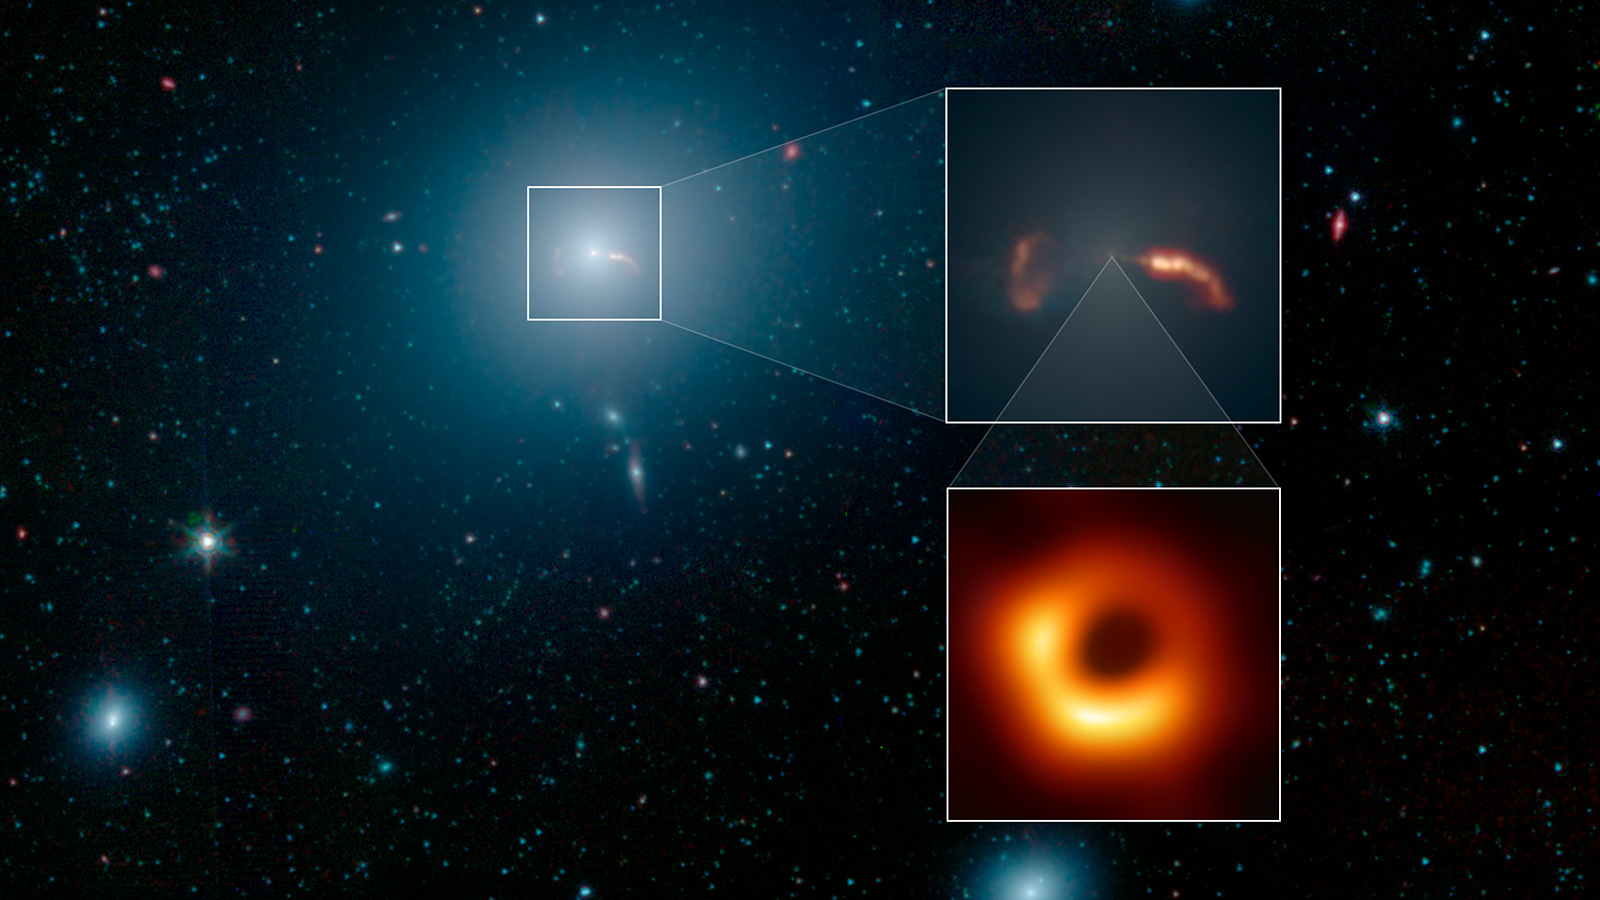 The Galaxy, the Jet, and a Famous Black Hole